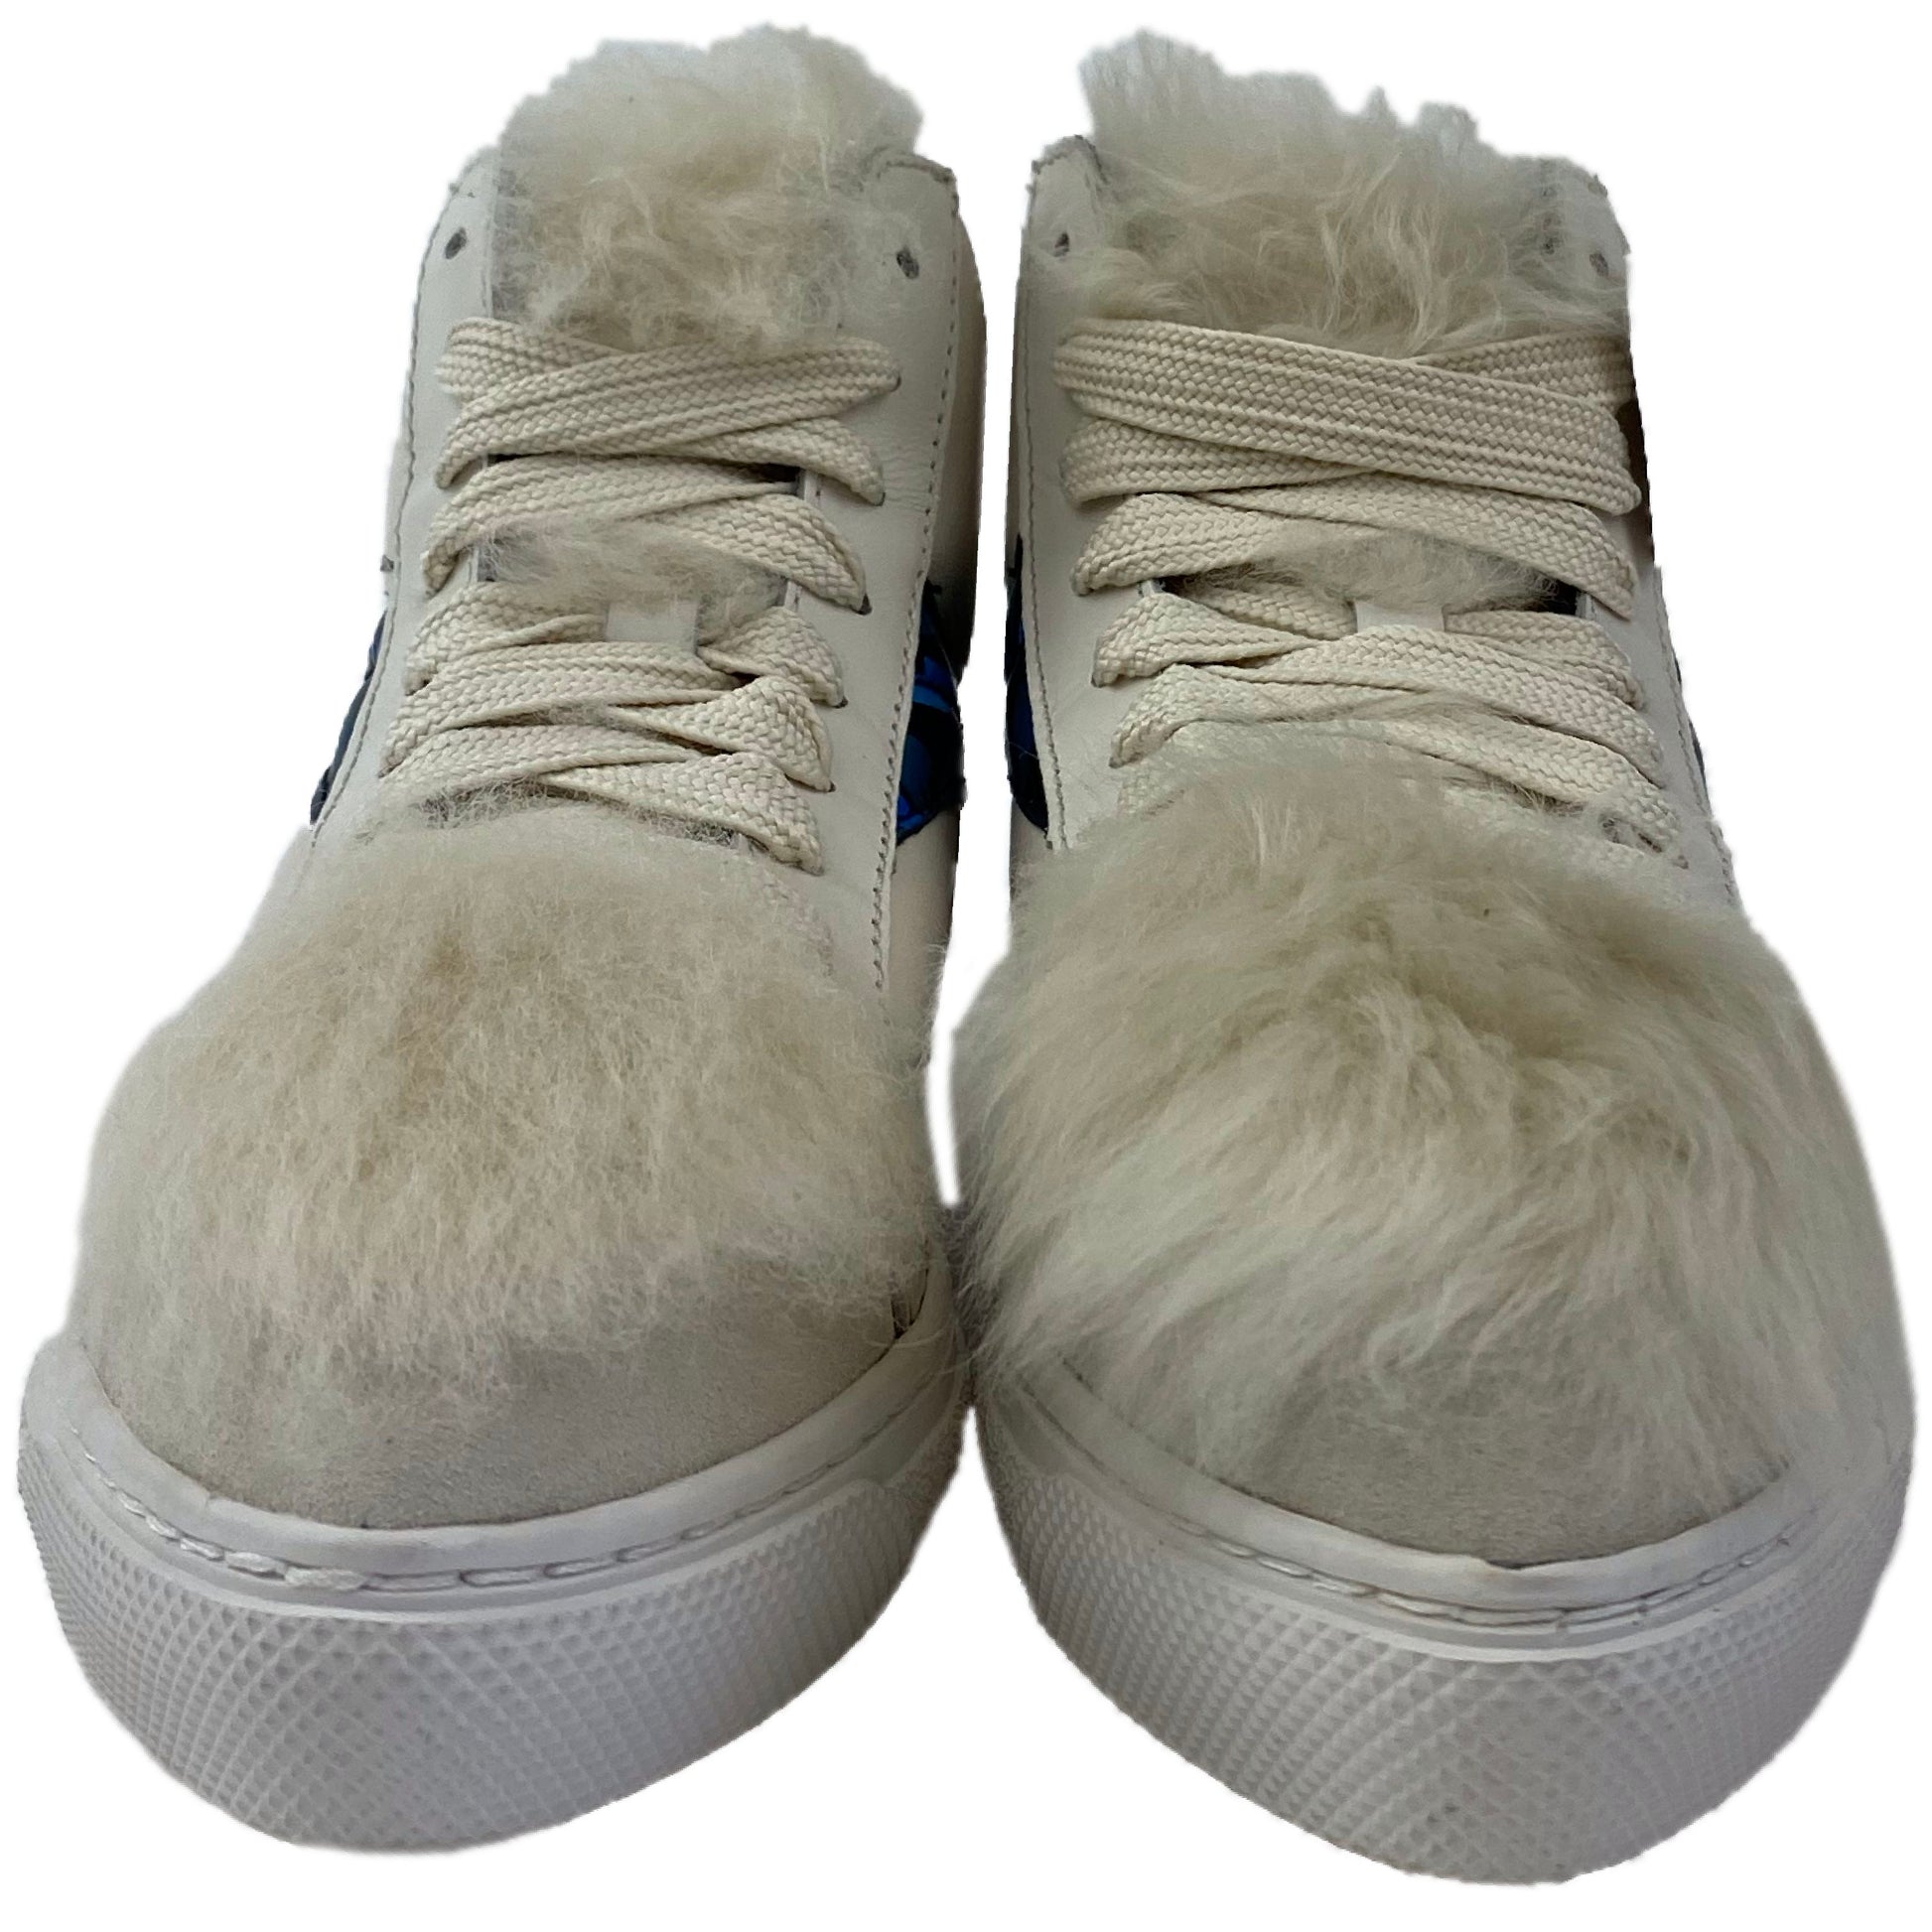 NWT Coach C203 Soft Smooth/Calf Suede Pointy Toe High Top Sneakers